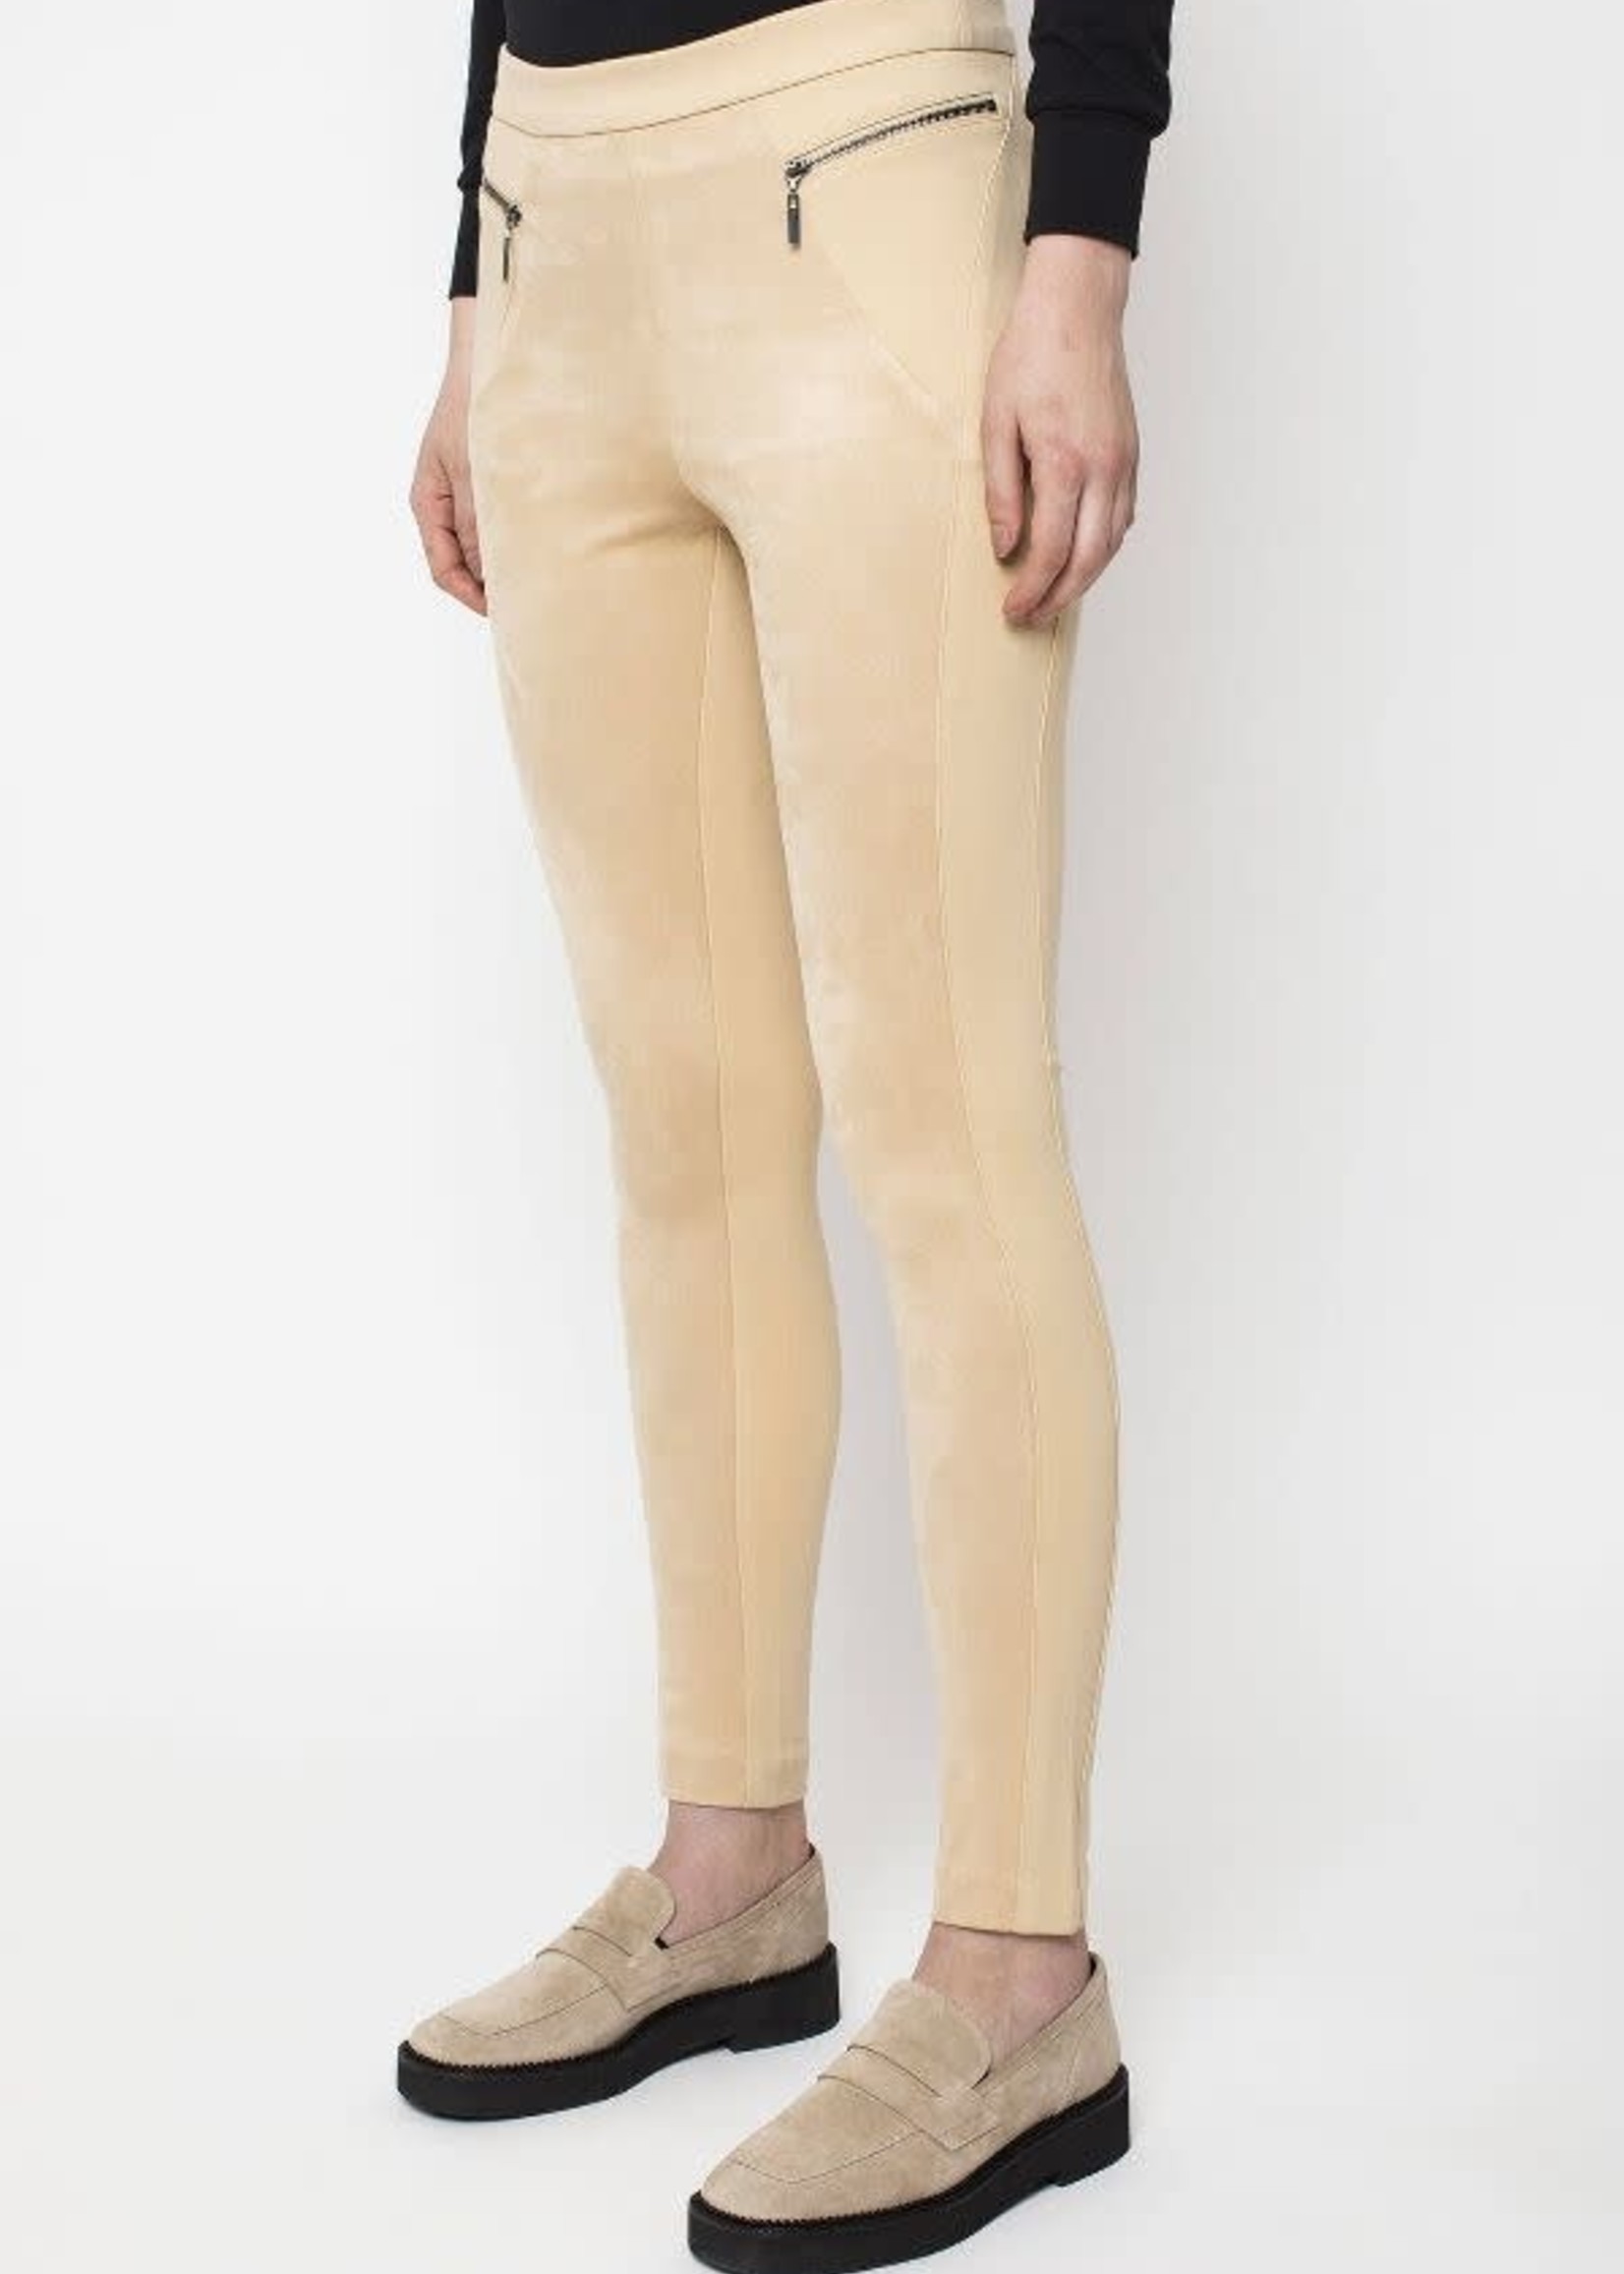 By Lyse ByLyse Stretch Suede Pull On Pant